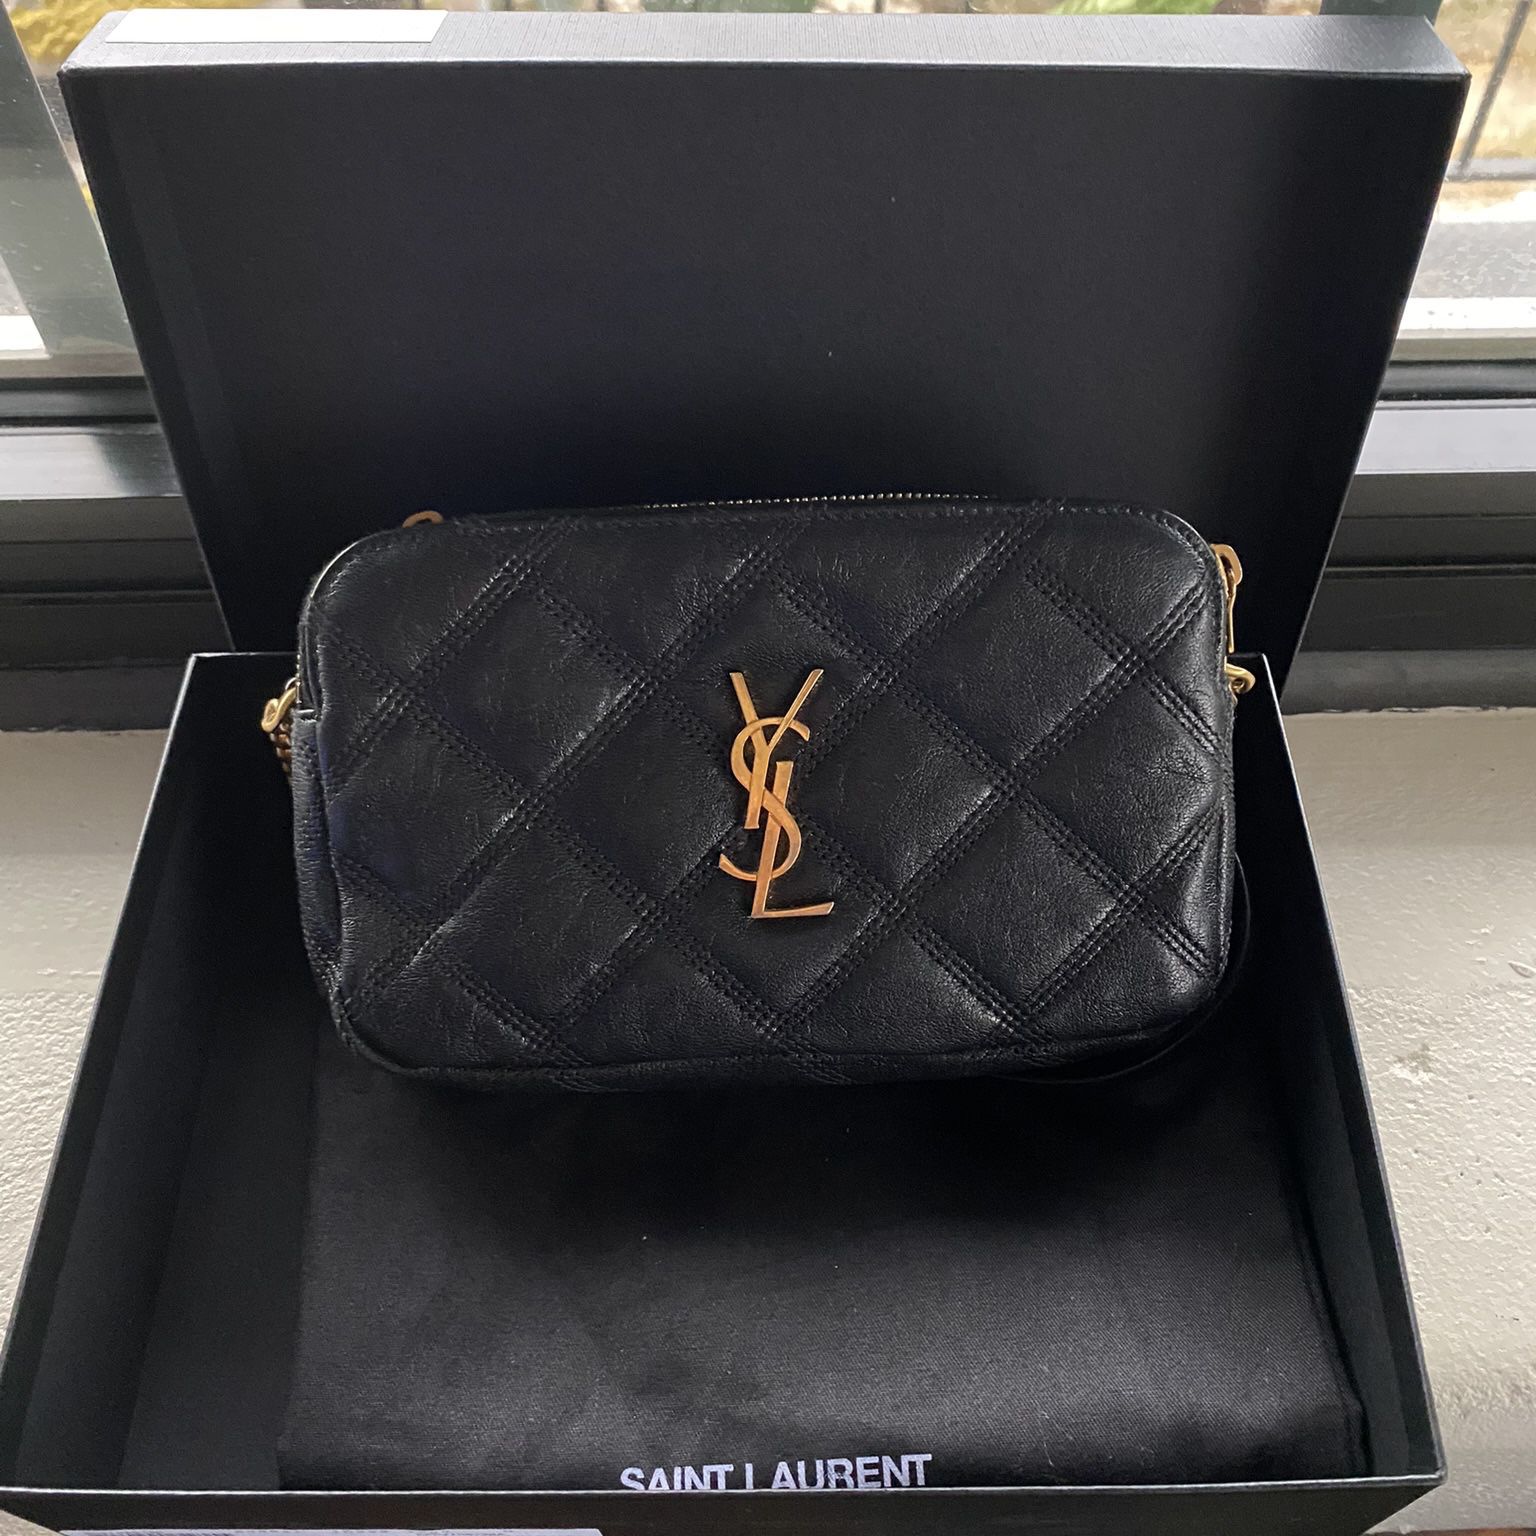 Authentic YSL Phyton Skin Bag for Sale in Lakeside, CA - OfferUp